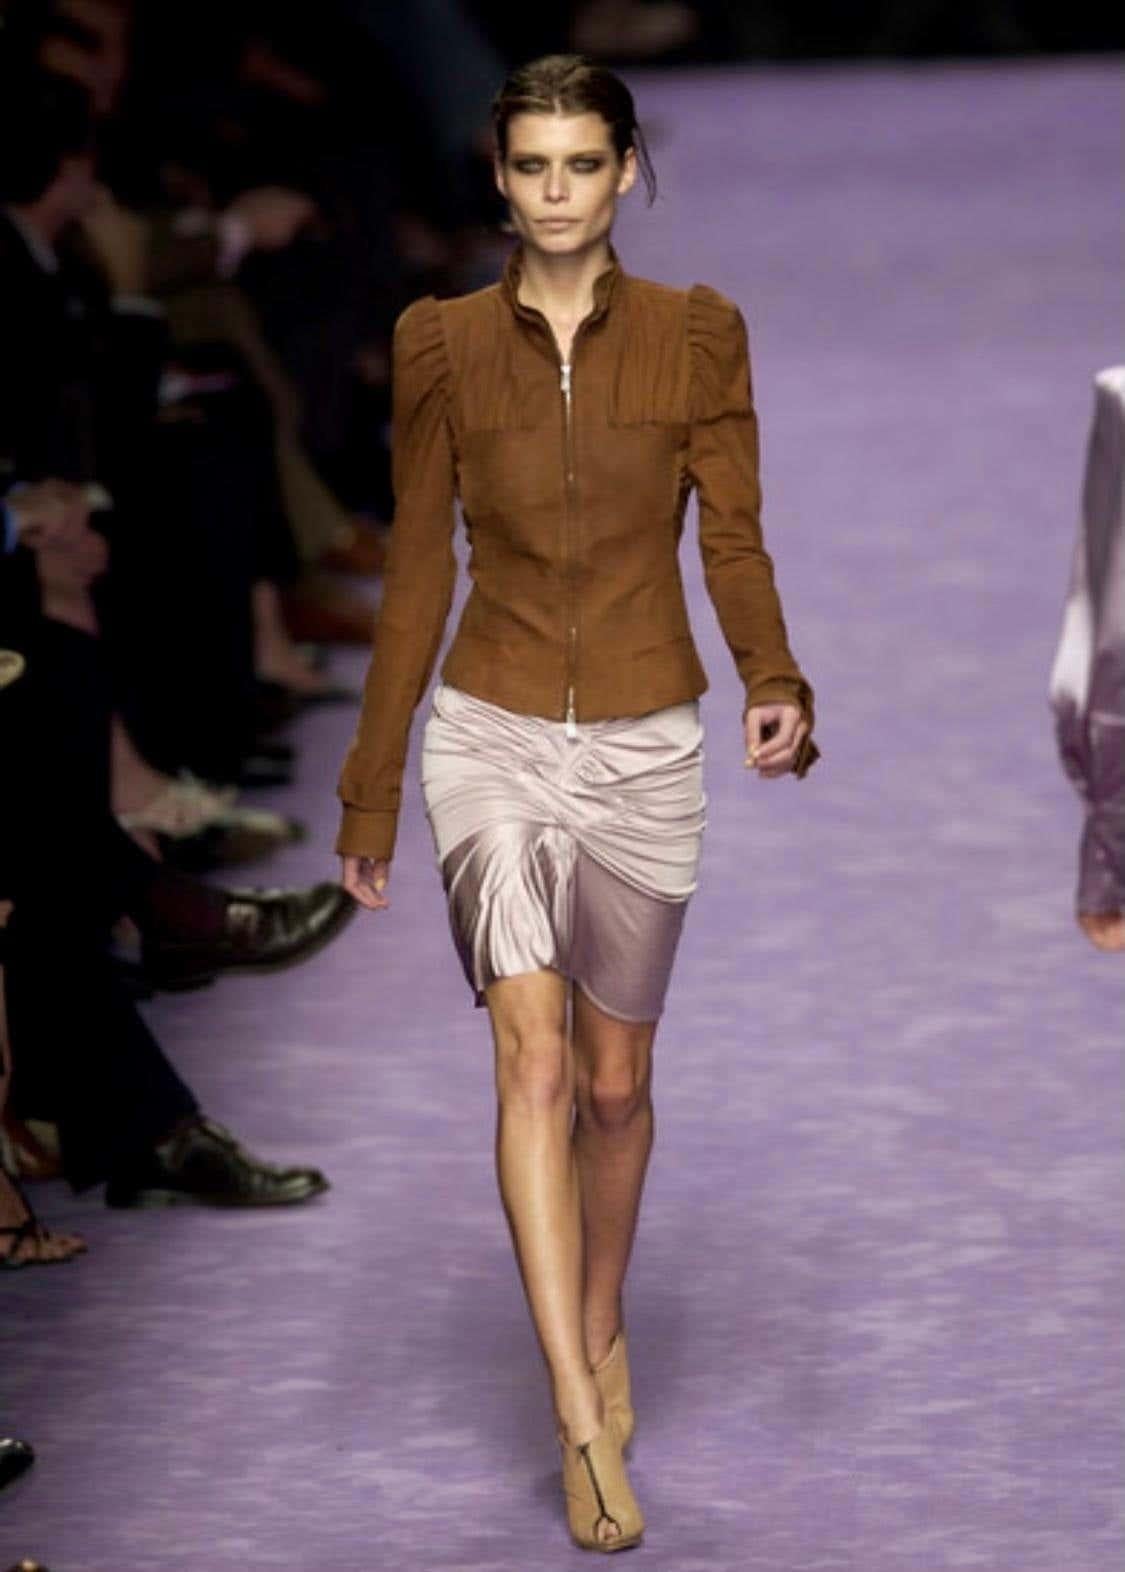 Presenting a brown stretch viscose blend skirt designed by Tom Ford for Yves Saint Laurent Rive Gauche's Spring/Summer 2003 collection. The beige/taupe version of this skirt debuted on the season's runway as part of look 3 on Omahyra Mota and in a